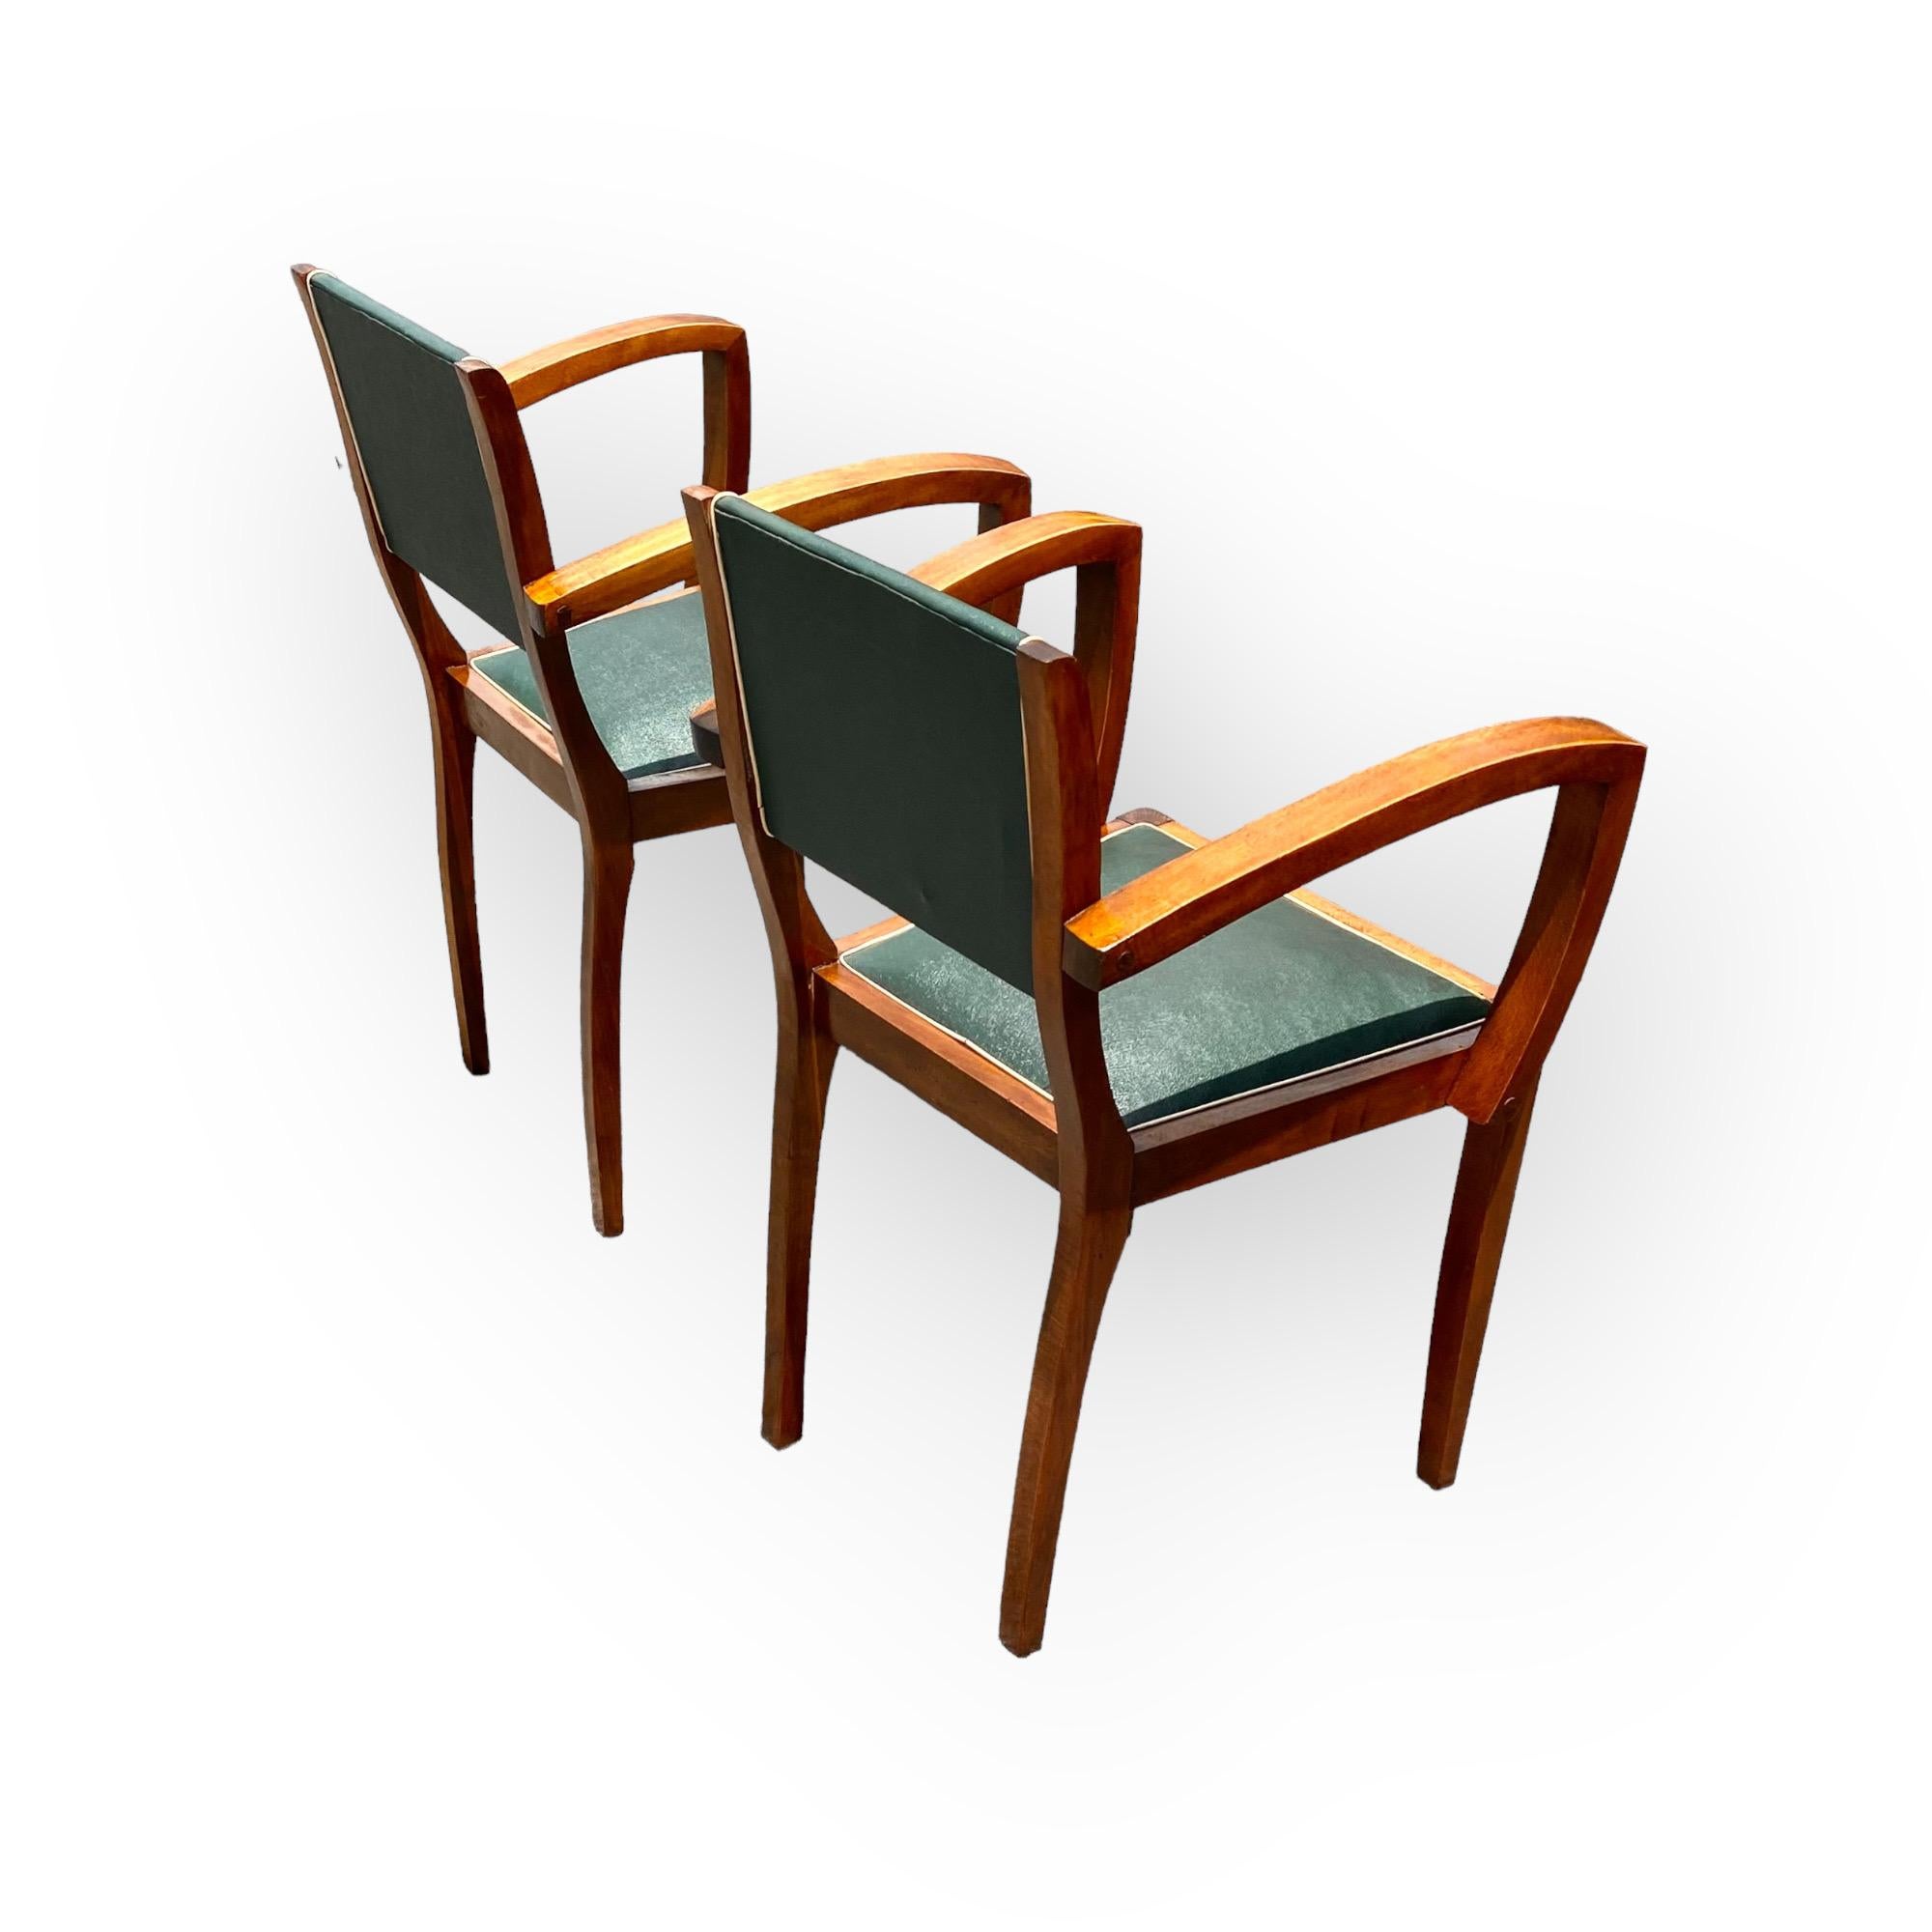 An outstanding pair of French Parisian Art Deco bridge chairs, with open arms having the original faux leather upholstery with contrast banding in good condition, circa 1930.
One must love the classic Art Deco lines of the pair as their